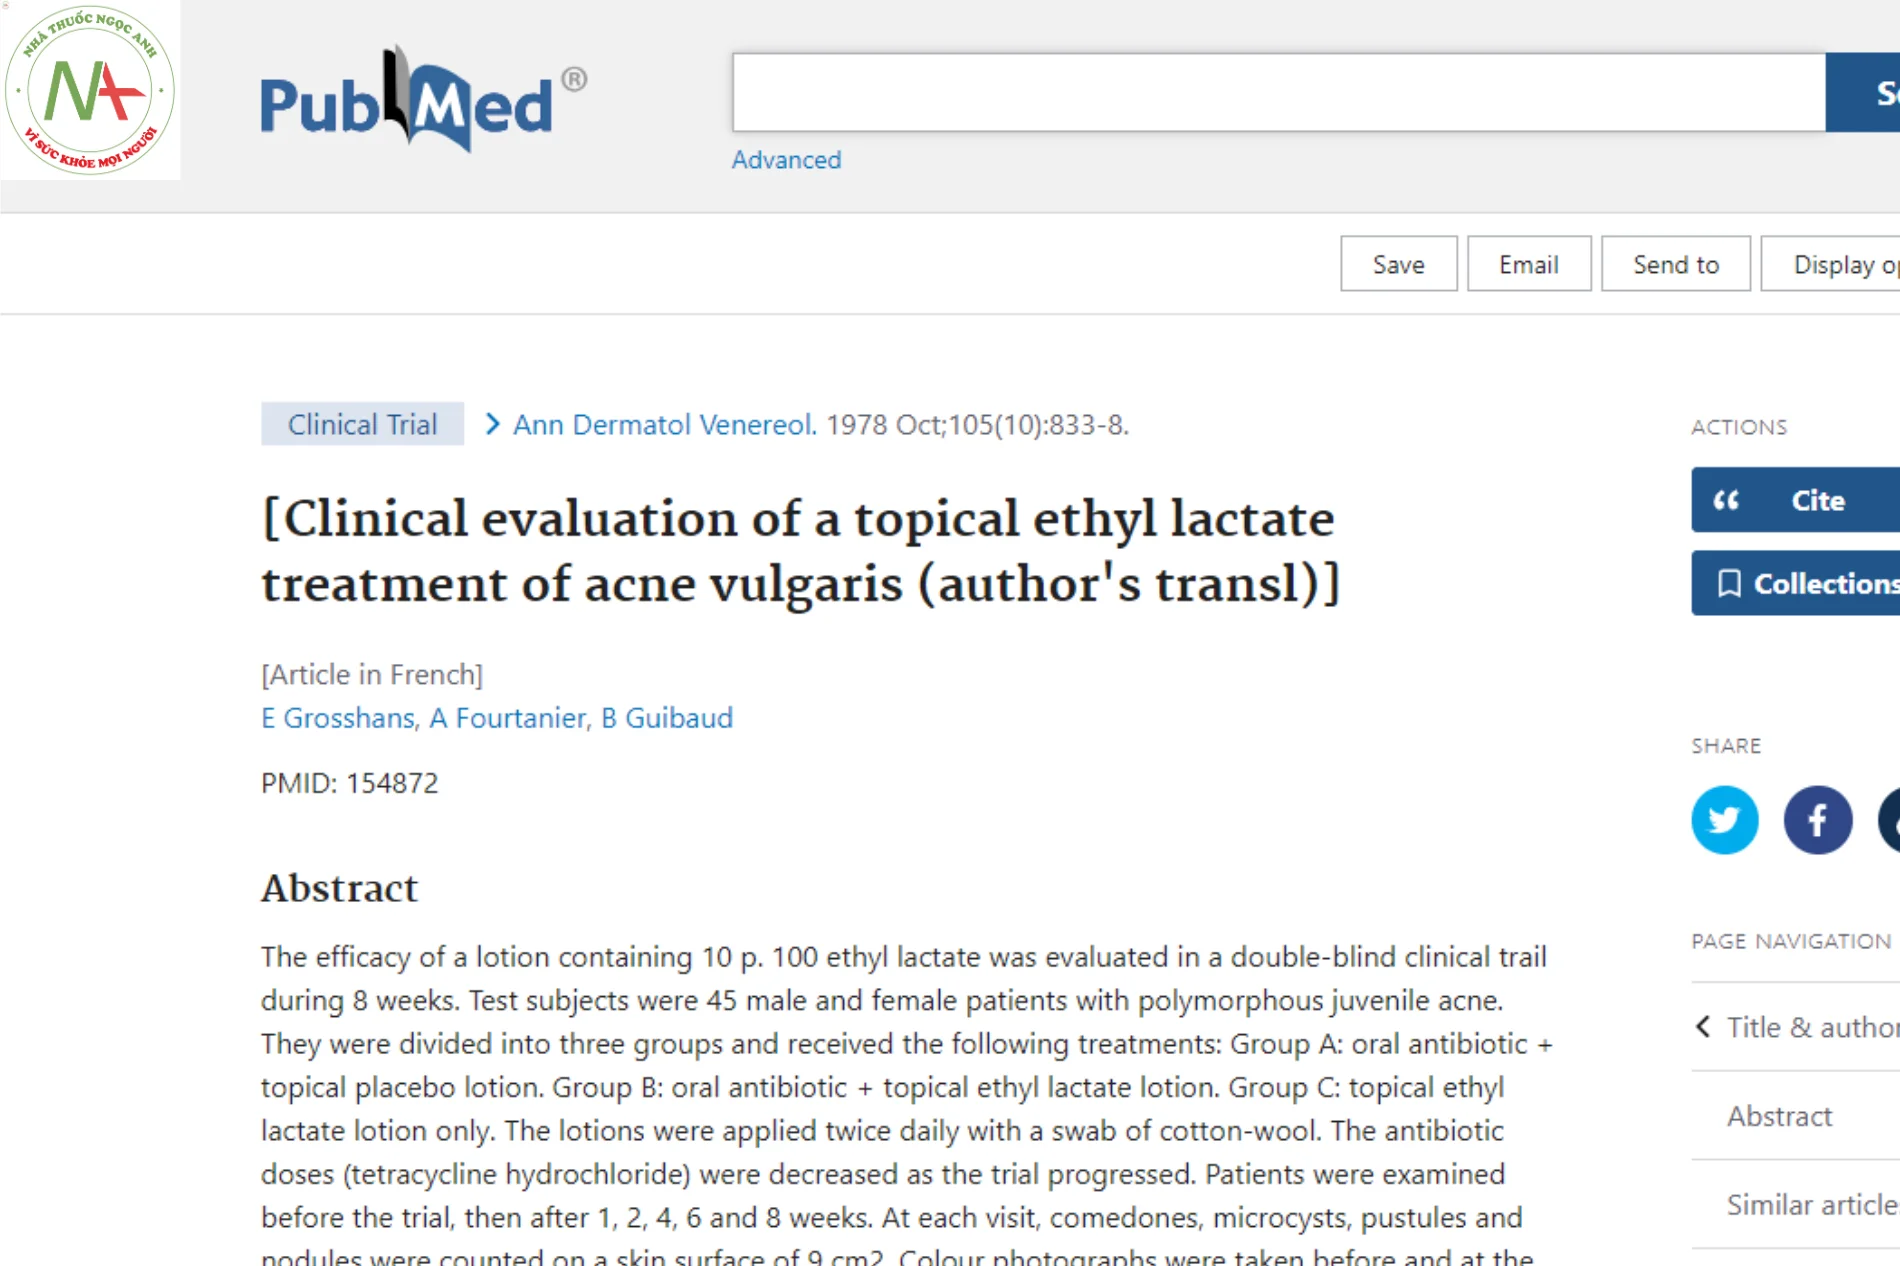 Clinical evaluation of conventional acne treatment with topical ethyl lactate